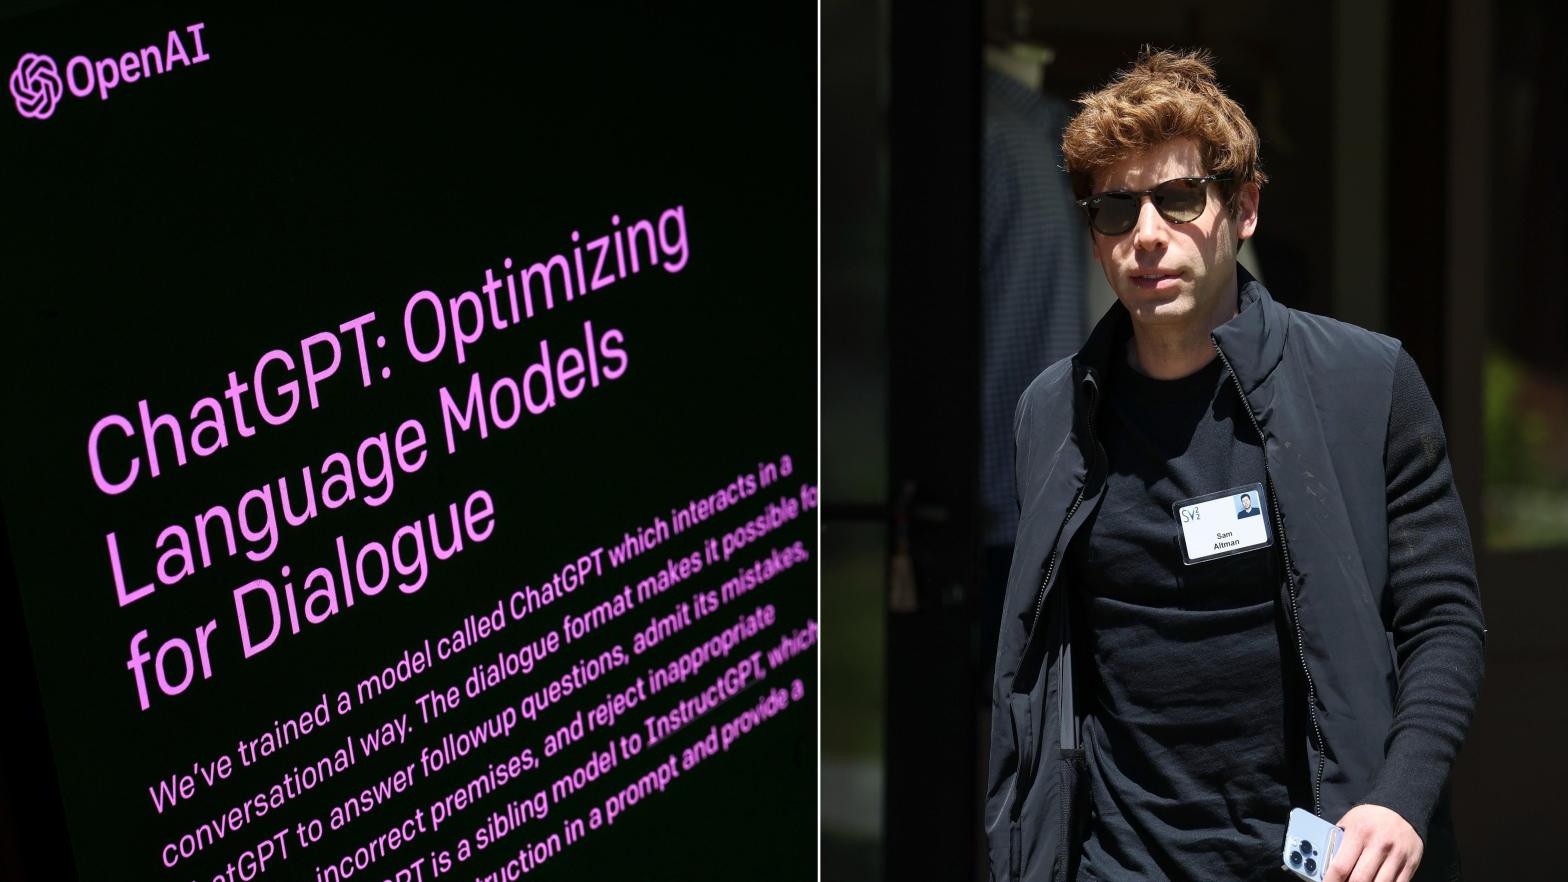 OpenAI CEO Sam Altman, right, reiterated that data submitted to the company through the ChatGPT API won't be used for AI training. The new API is an effort to make the company the go-to shop for any company looking to implement AI into its systems. (Photo: Leon Neal/Kevin Dietsch, Getty Images)